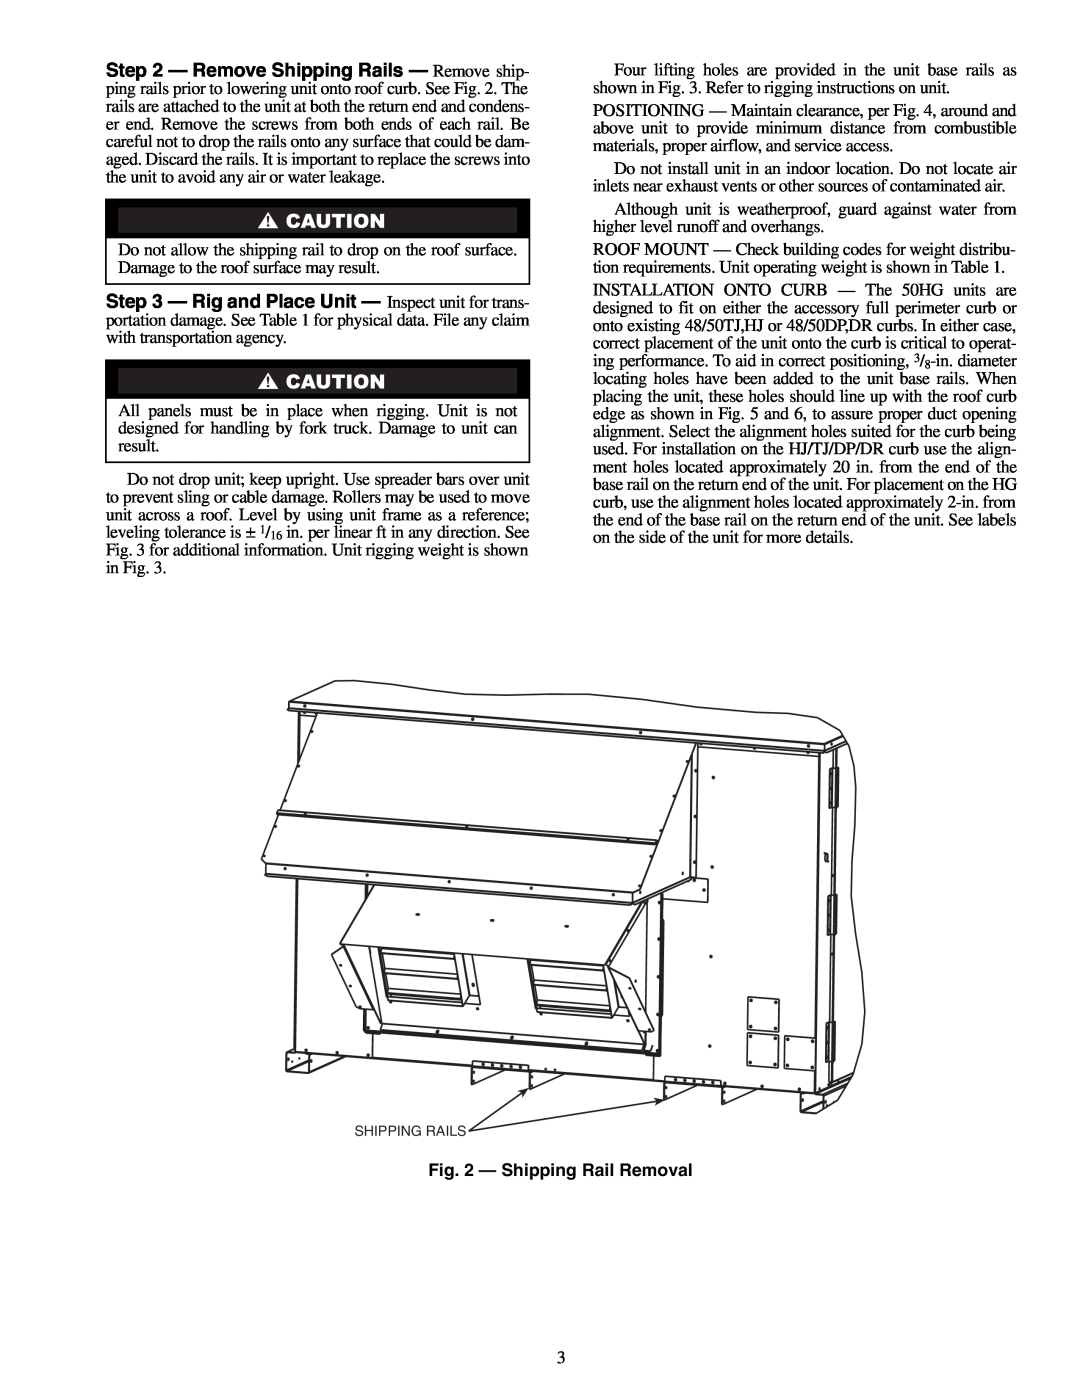 Carrier 50HG014-028 installation instructions Shipping Rail Removal 